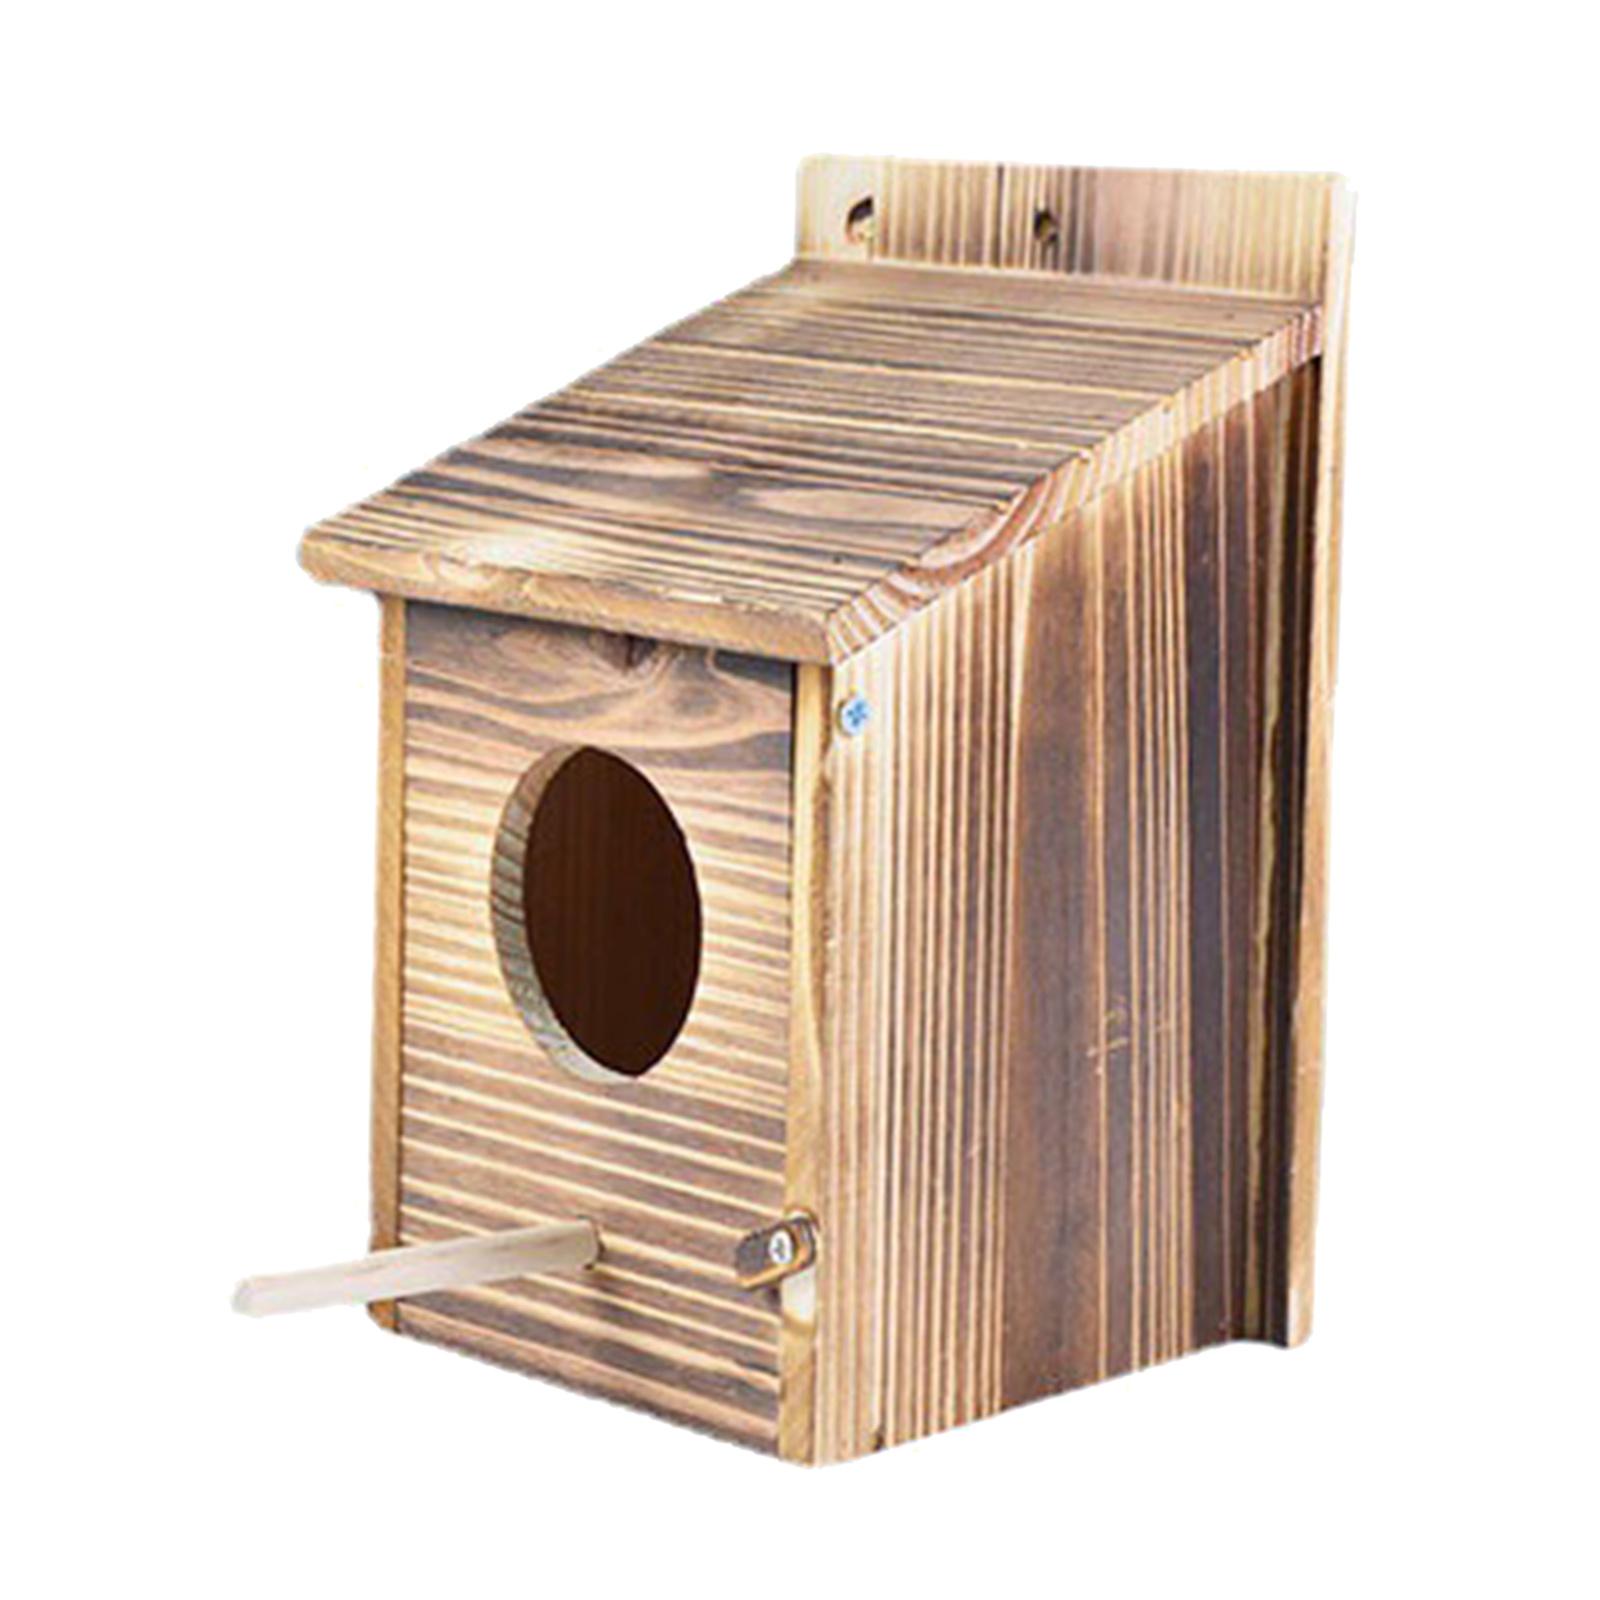 Bluebird House, Solid Wood Birdhouse, Weatherproof Bird House Designed Cleaning, Latch, , Fledgling Grooves - image 1 of 9